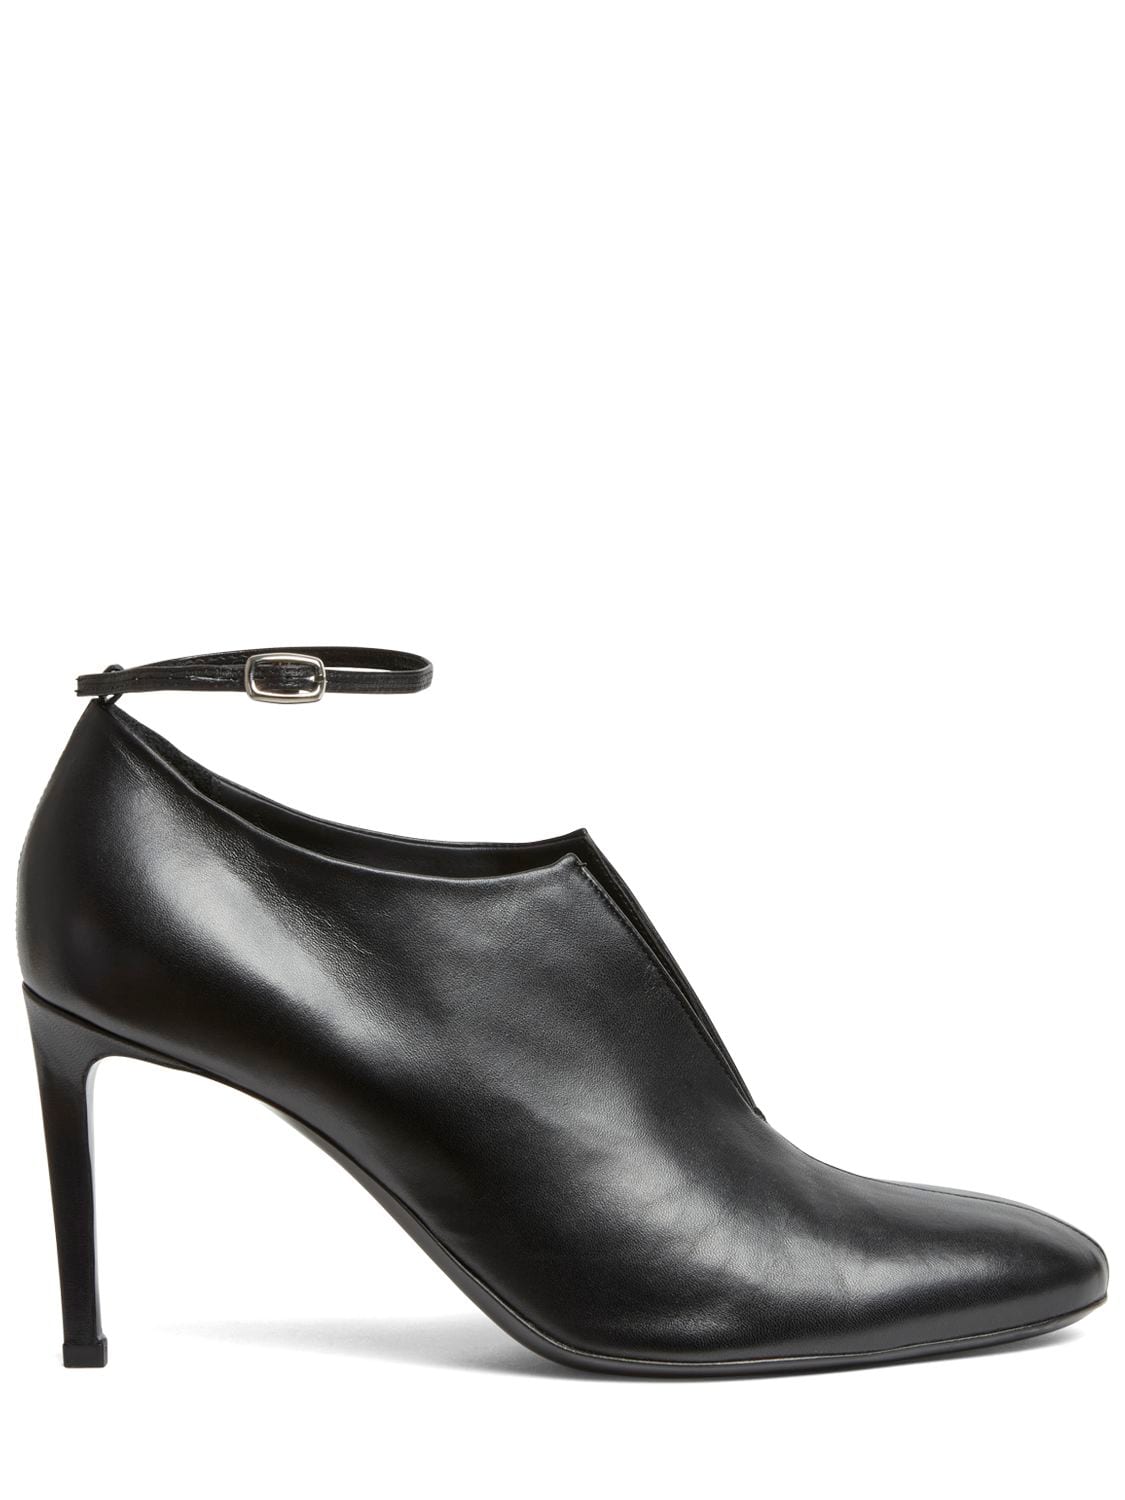 Peter Do Metallic Ankle-strap Low Booties In Le046 Black